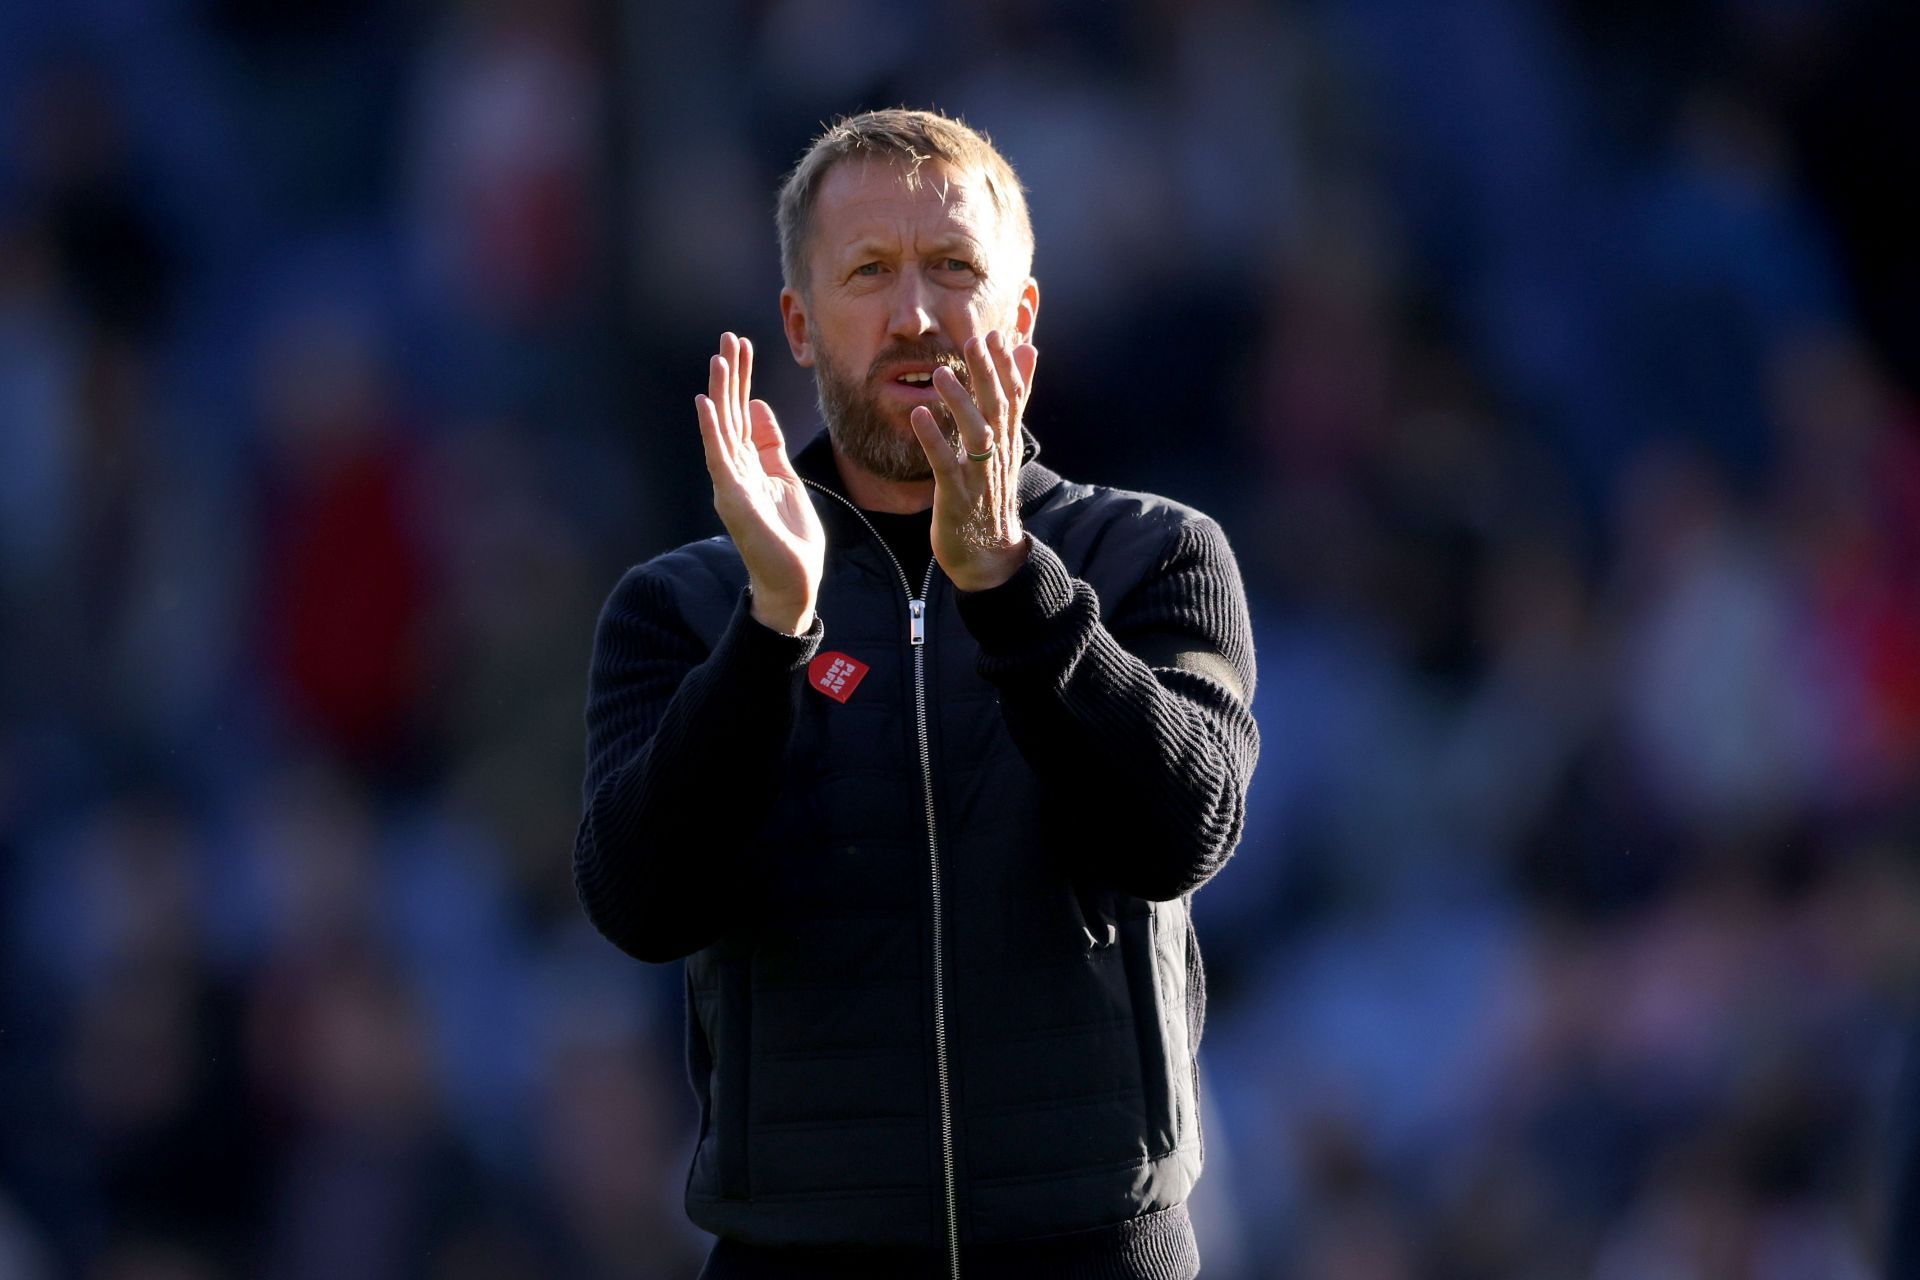 Graham Potter oversaw his first win as Chelsea boss over the weekend.